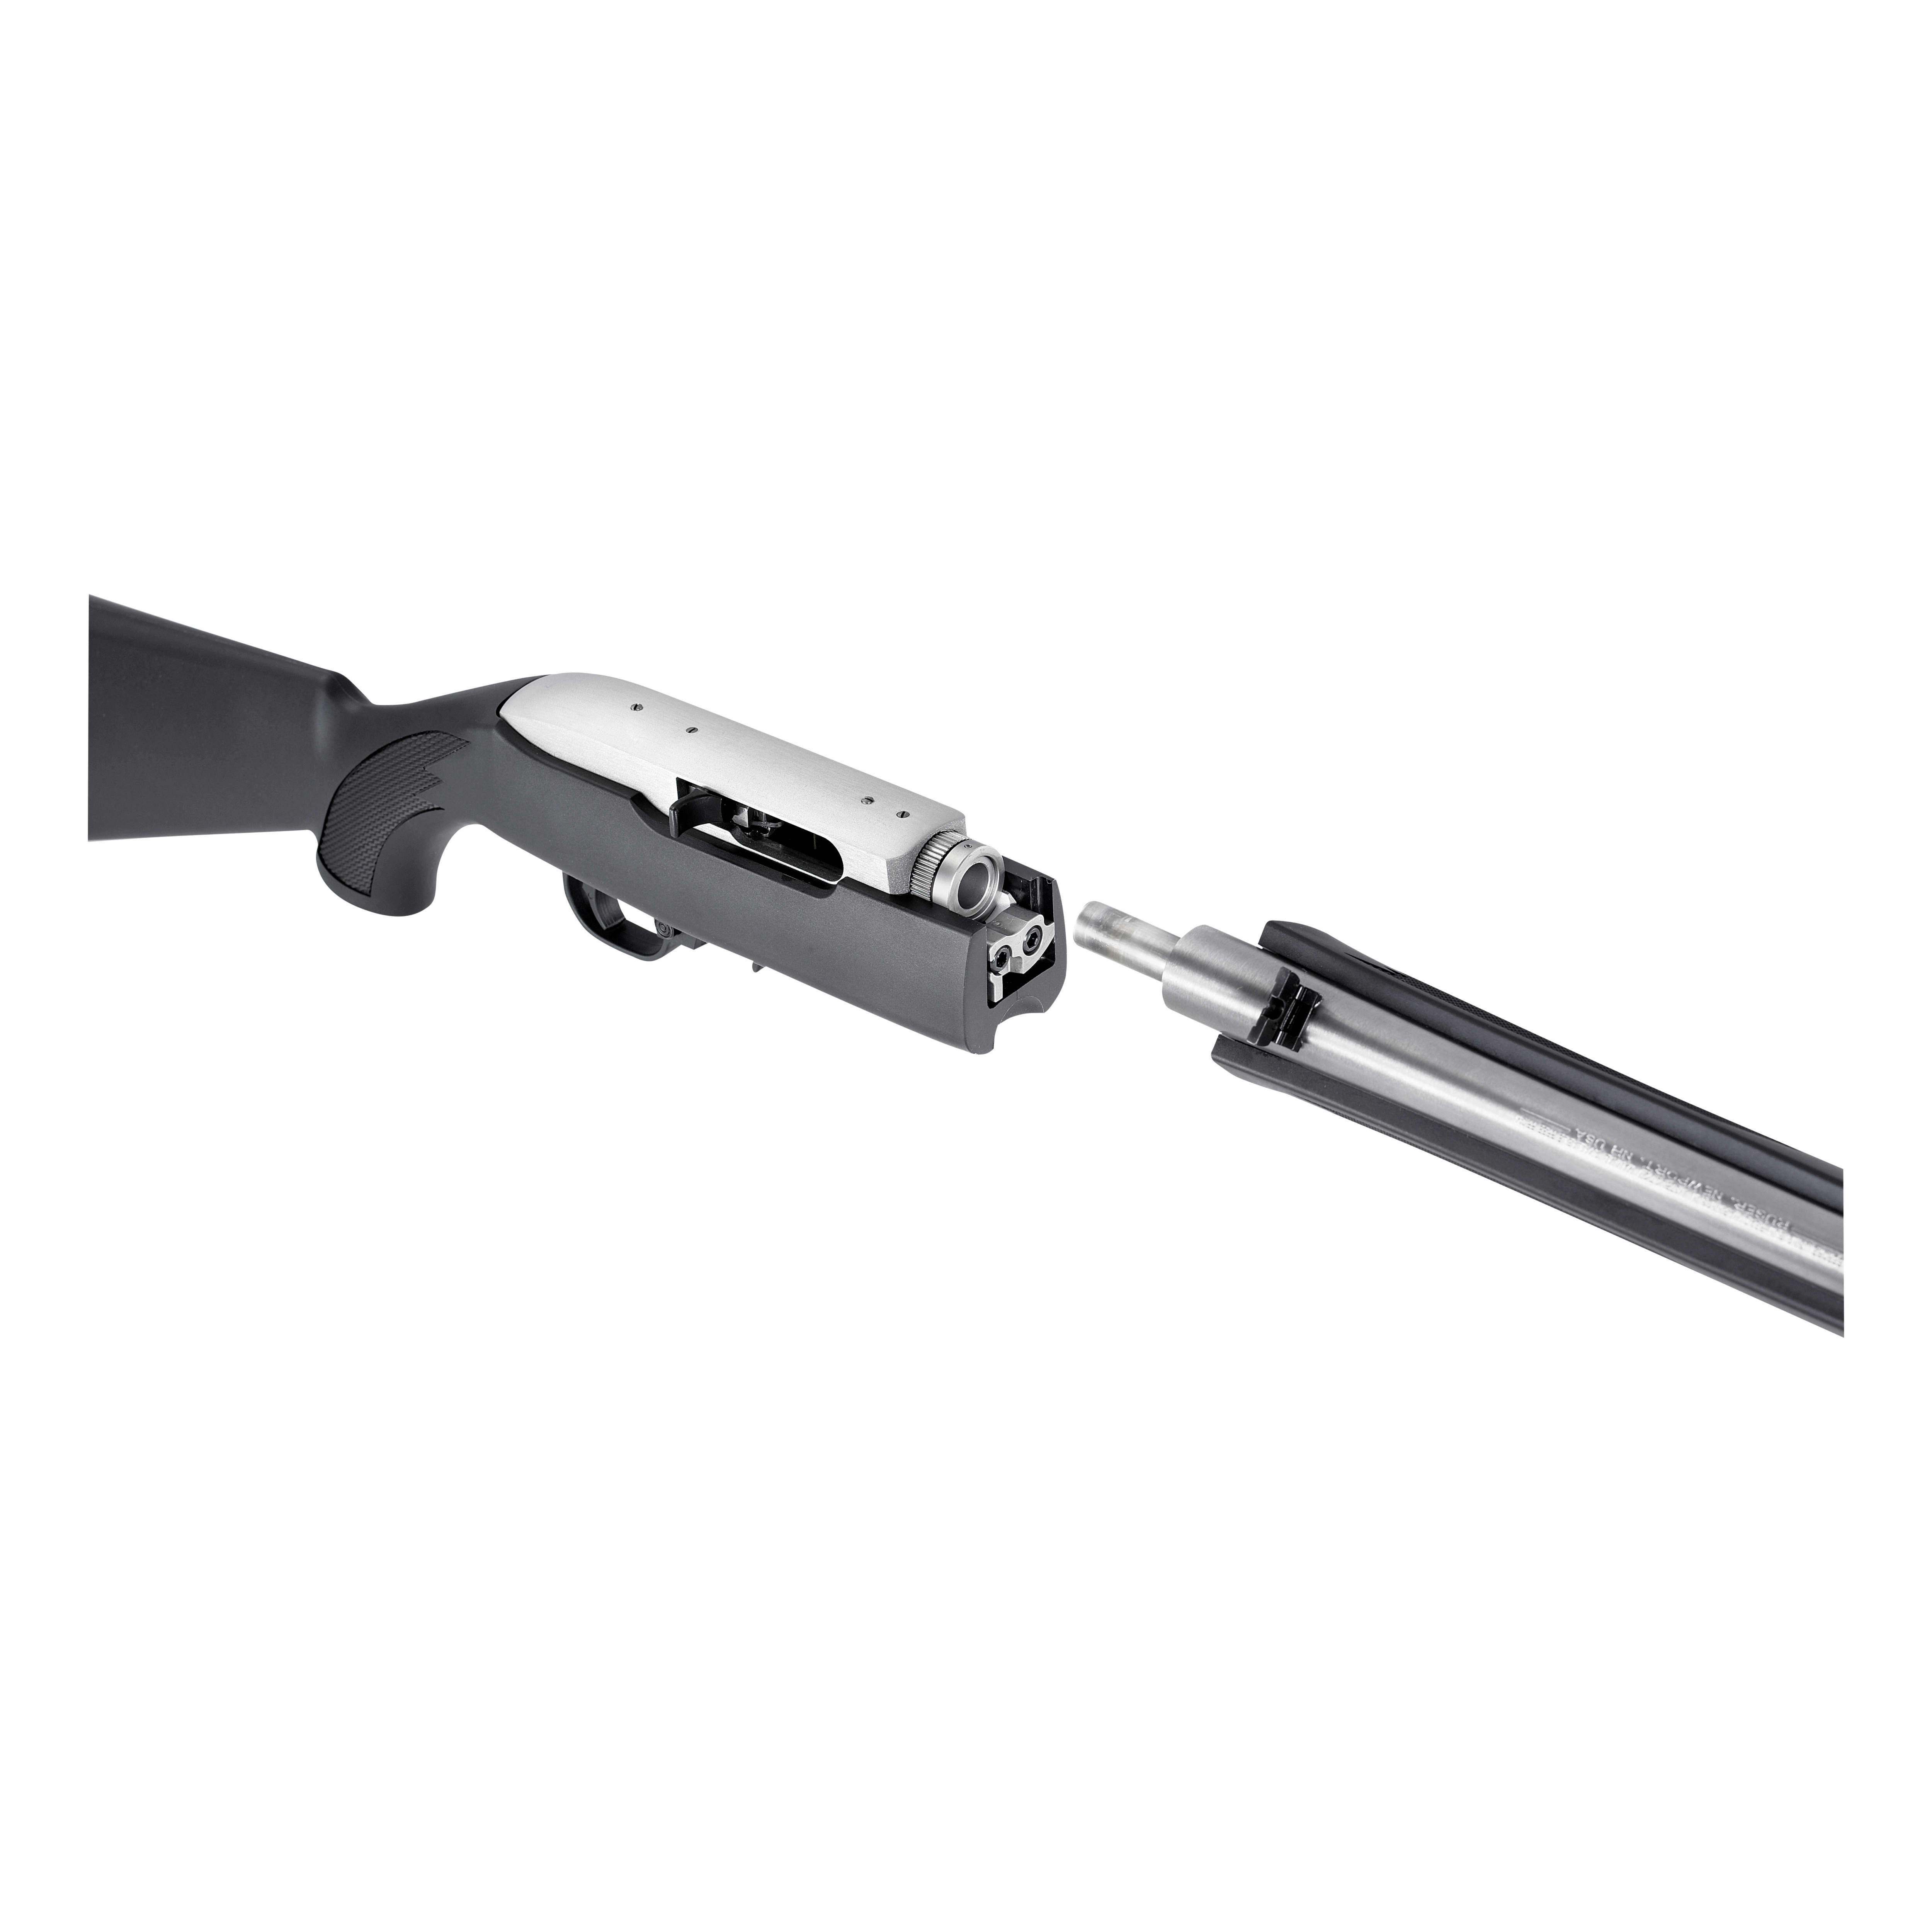 Ruger® 10/22® Takedown Semi-Auto Rifle - Detachable Barrel and Forend